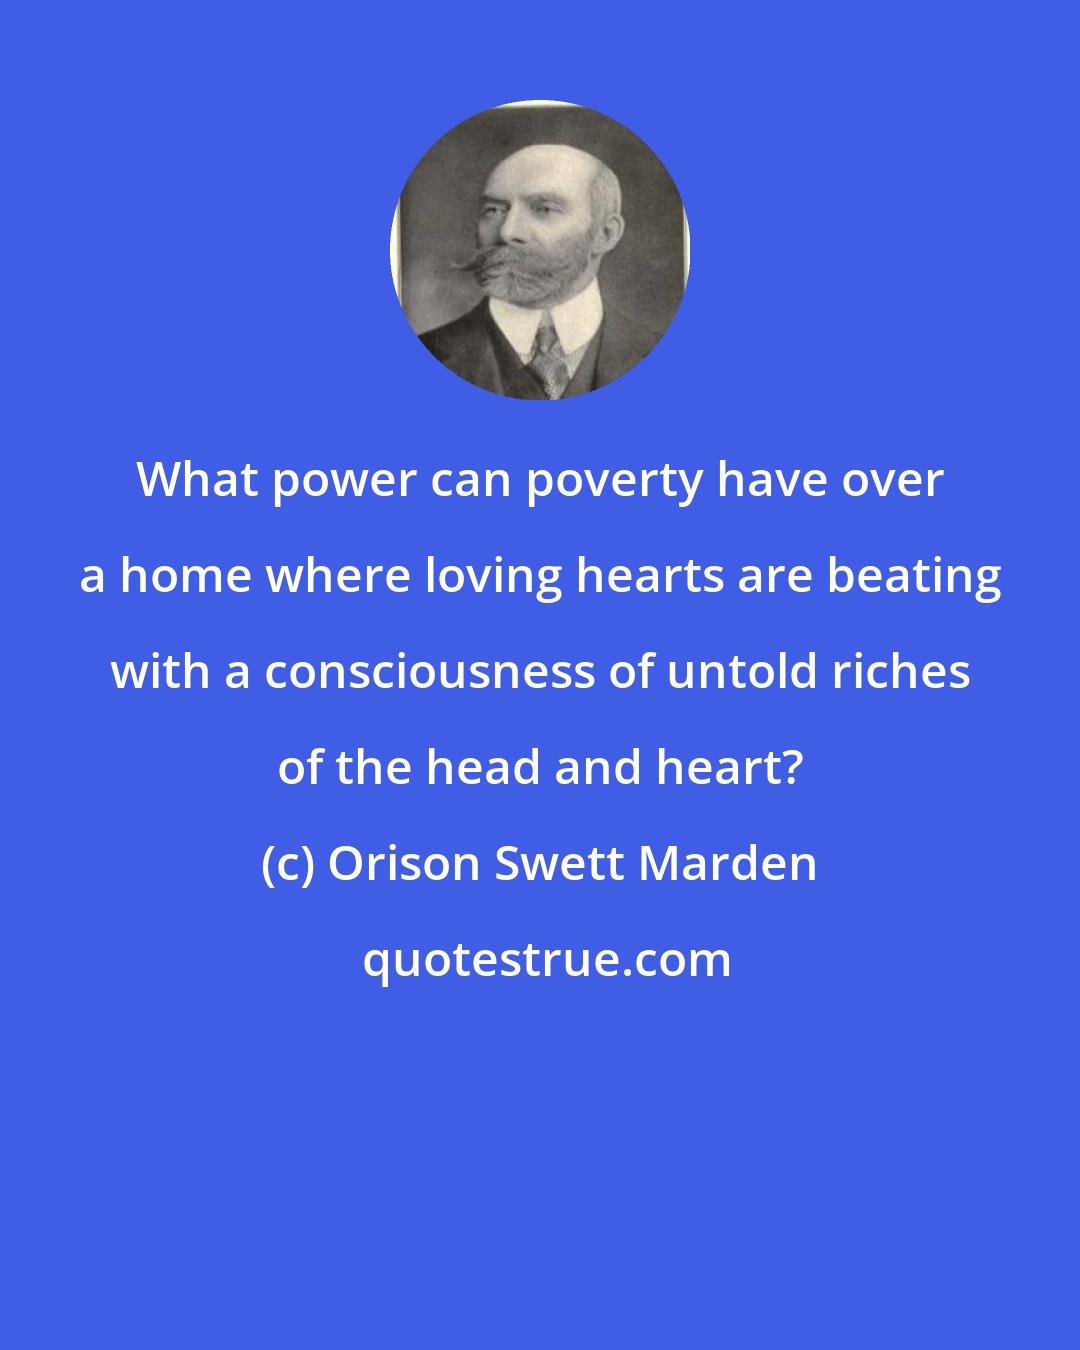 Orison Swett Marden: What power can poverty have over a home where loving hearts are beating with a consciousness of untold riches of the head and heart?